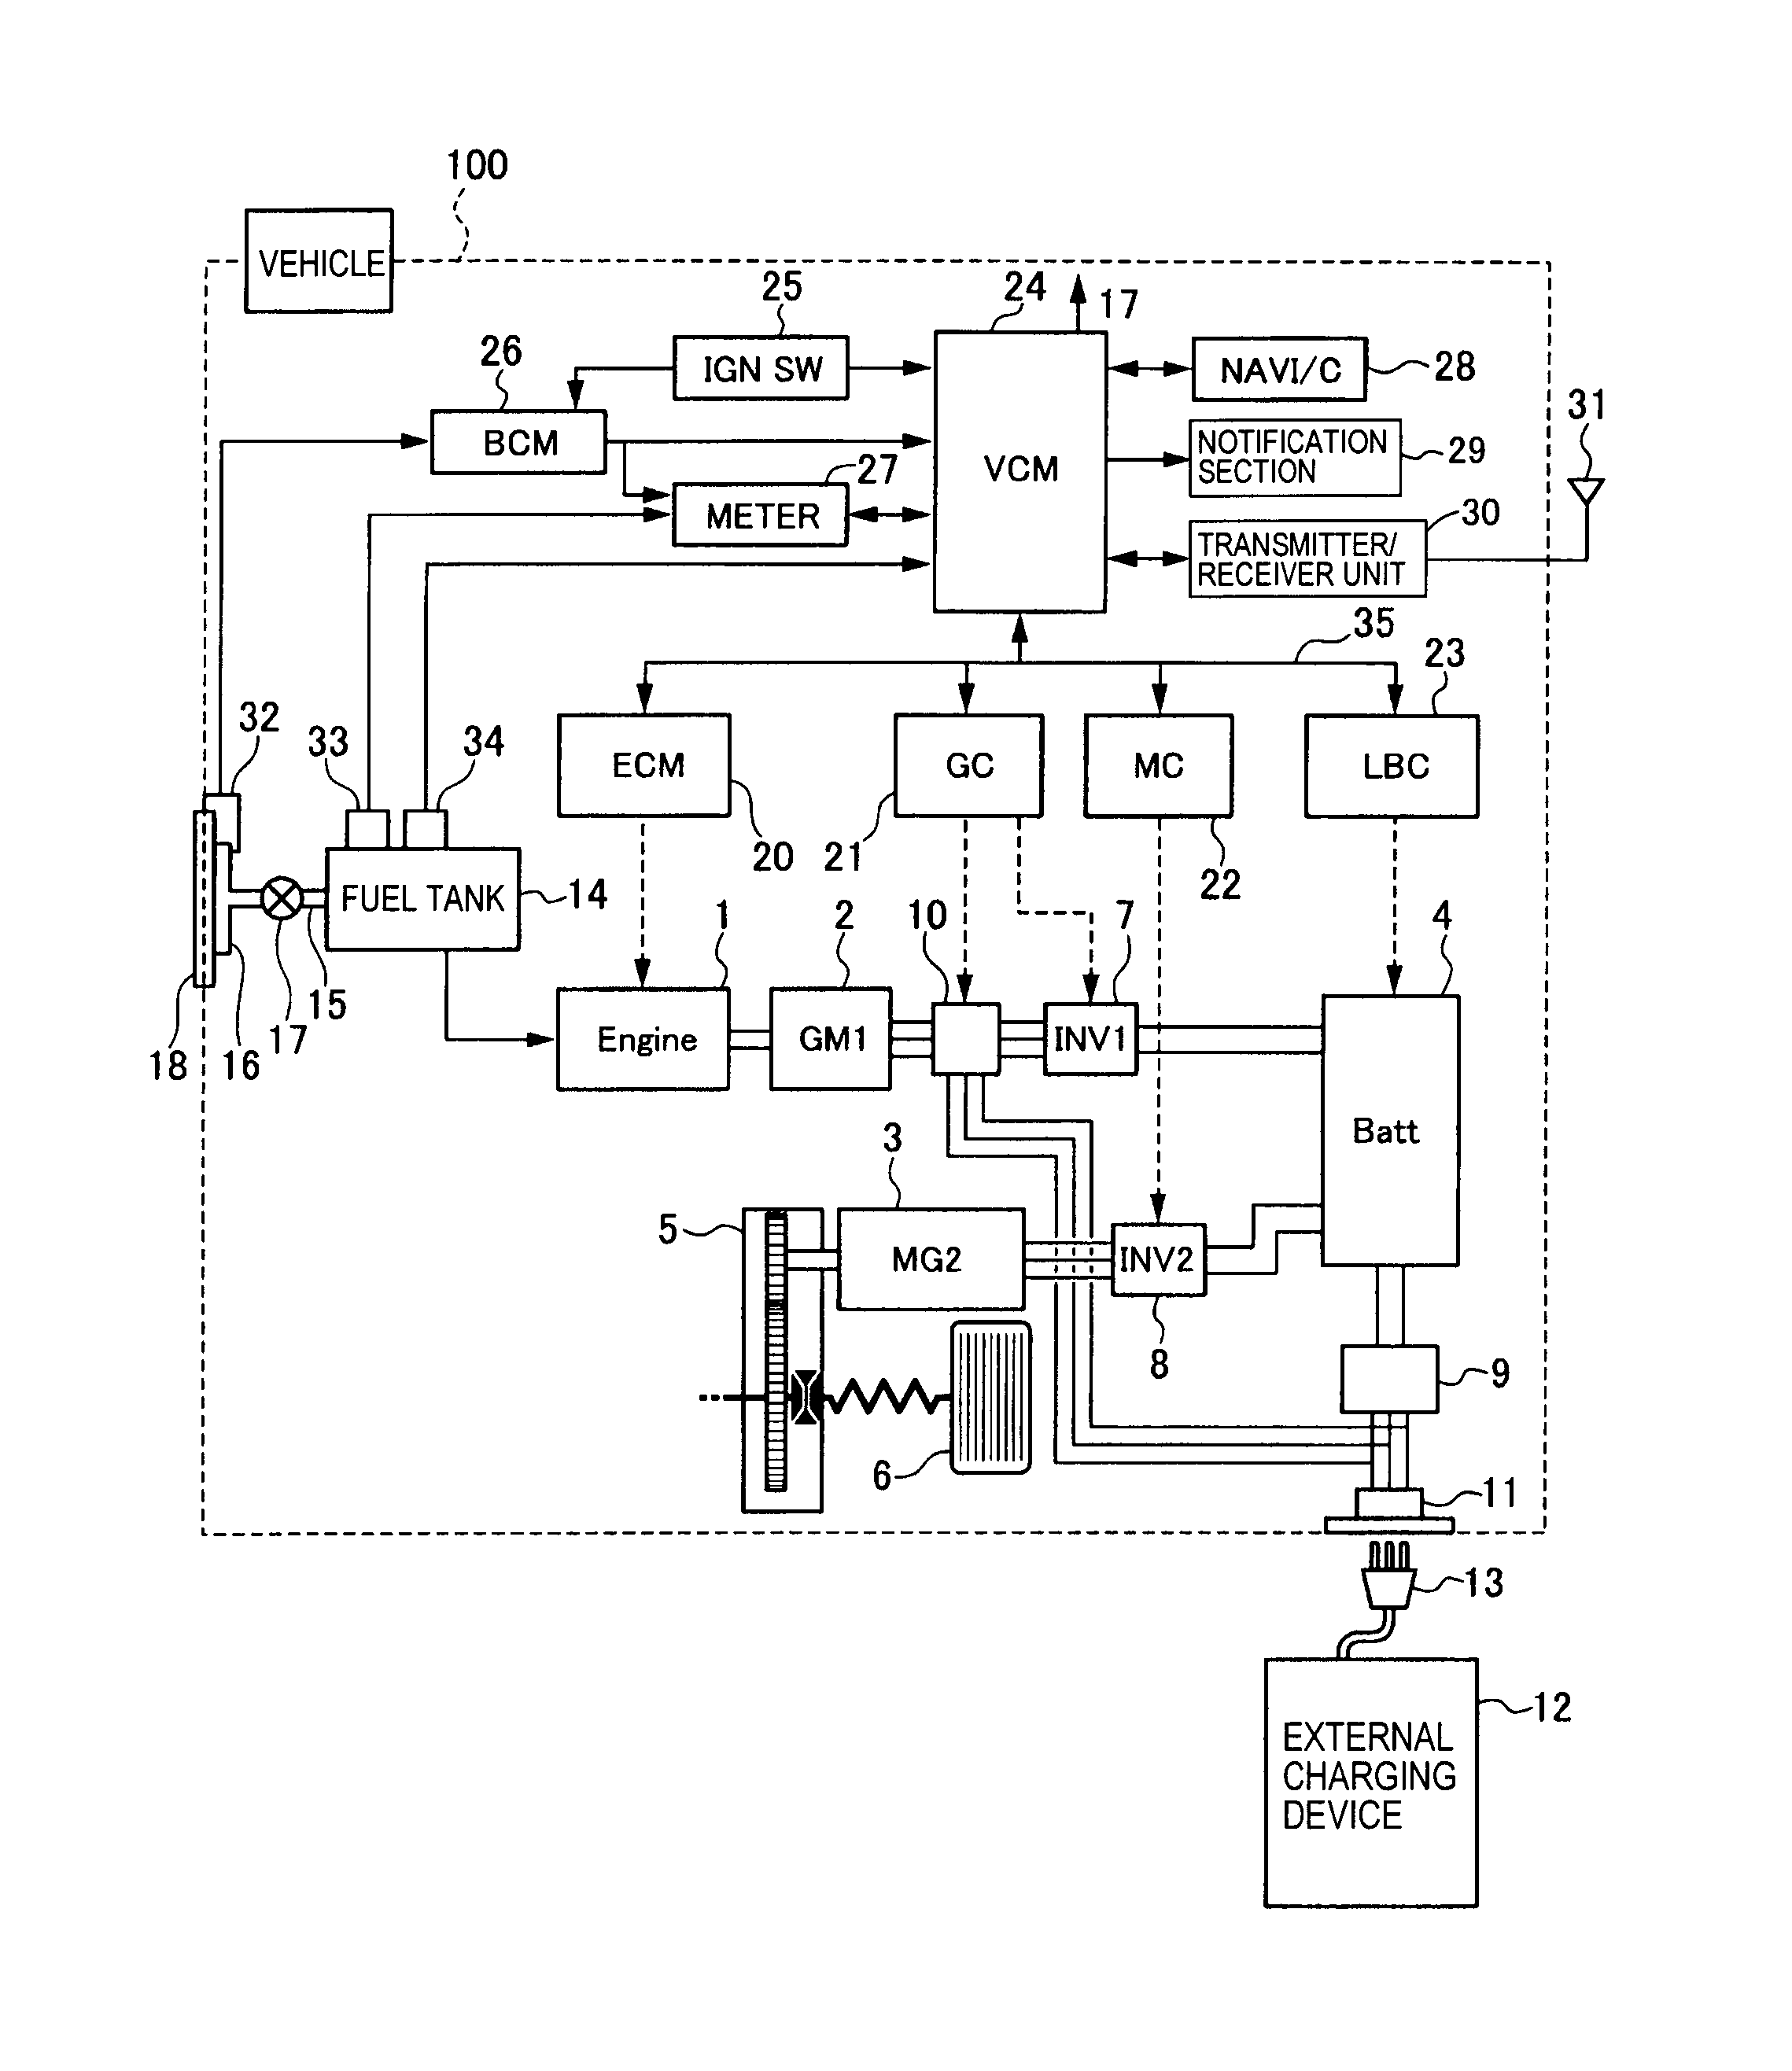 Wiring Diagram For Nutone 695 Heater And Fan Motor